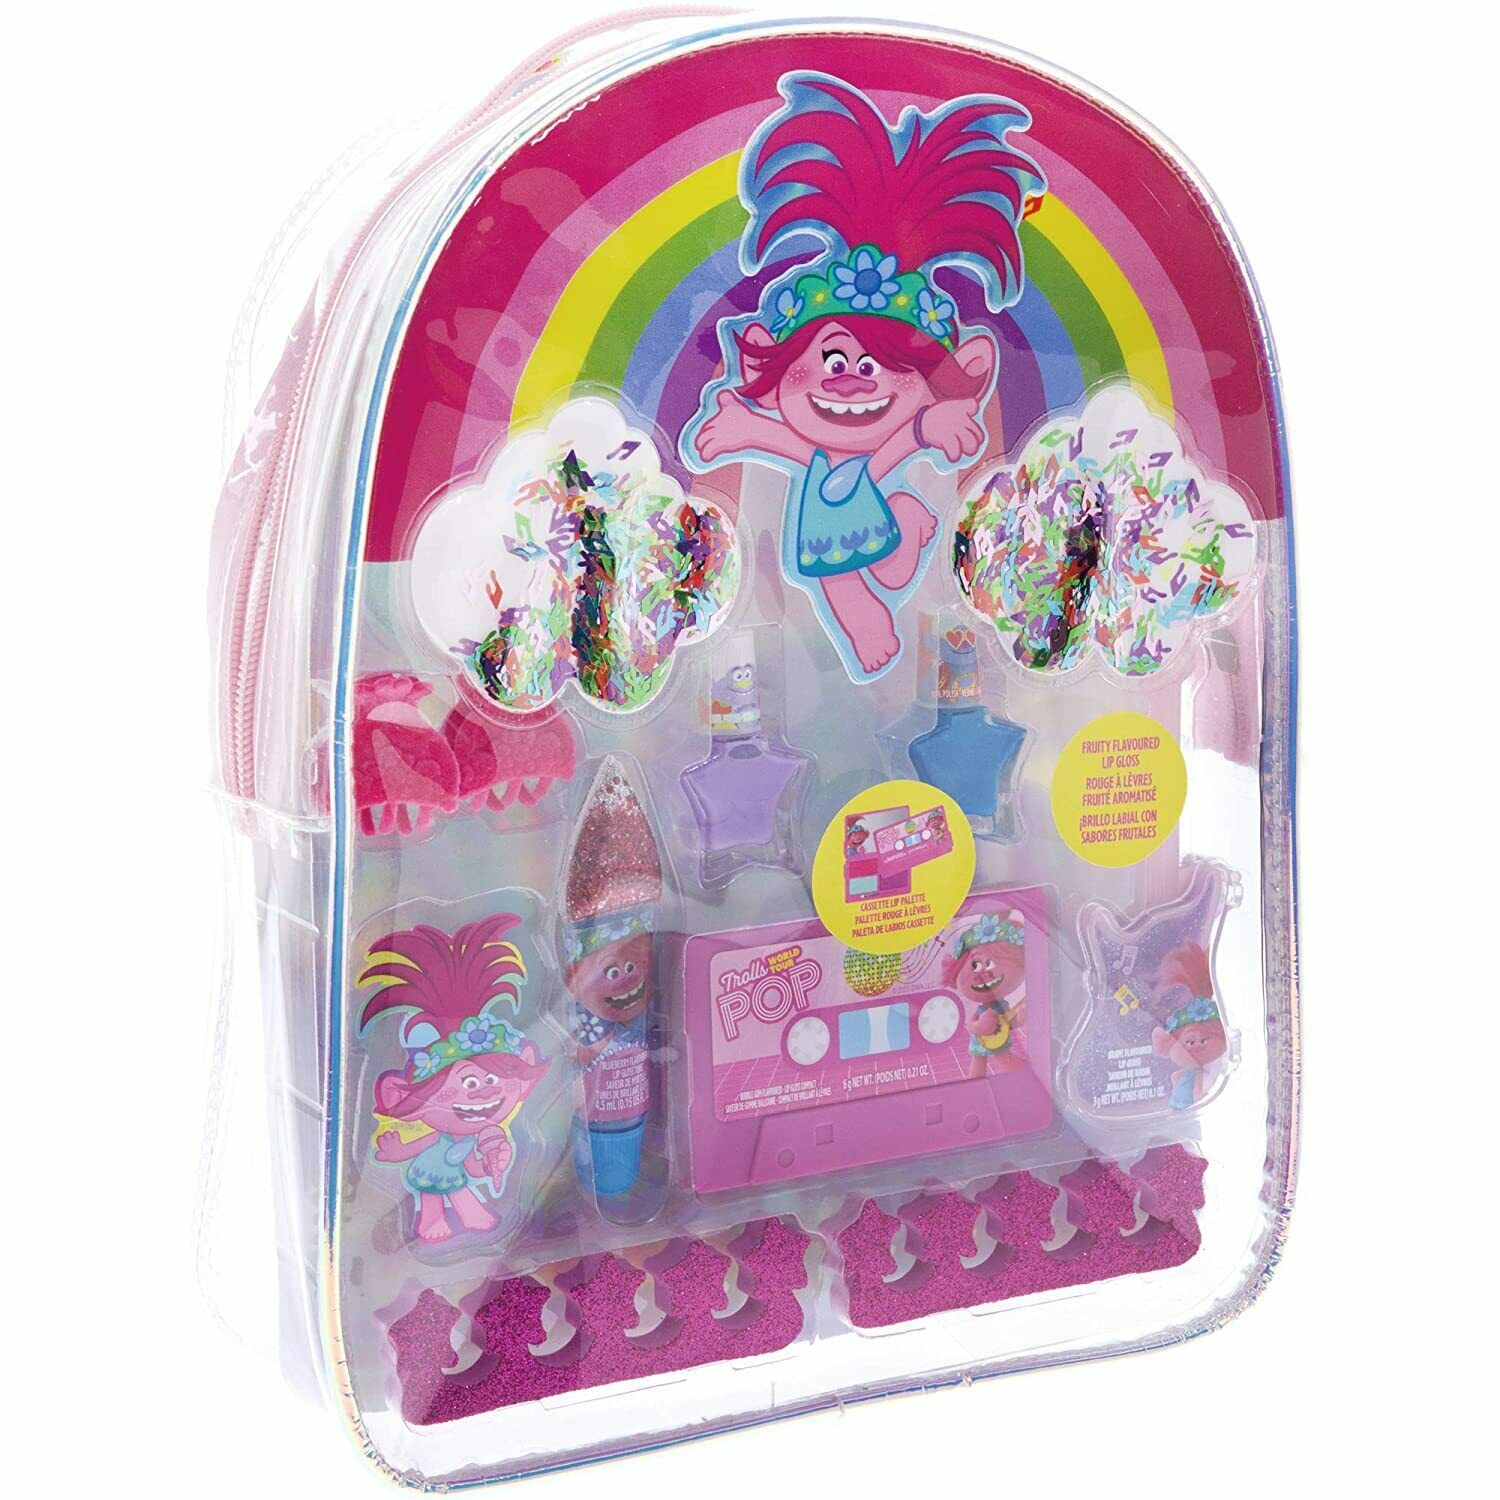 Townley Girl Trolls World Tour Cosmetic Backpack Set. 11 Ct